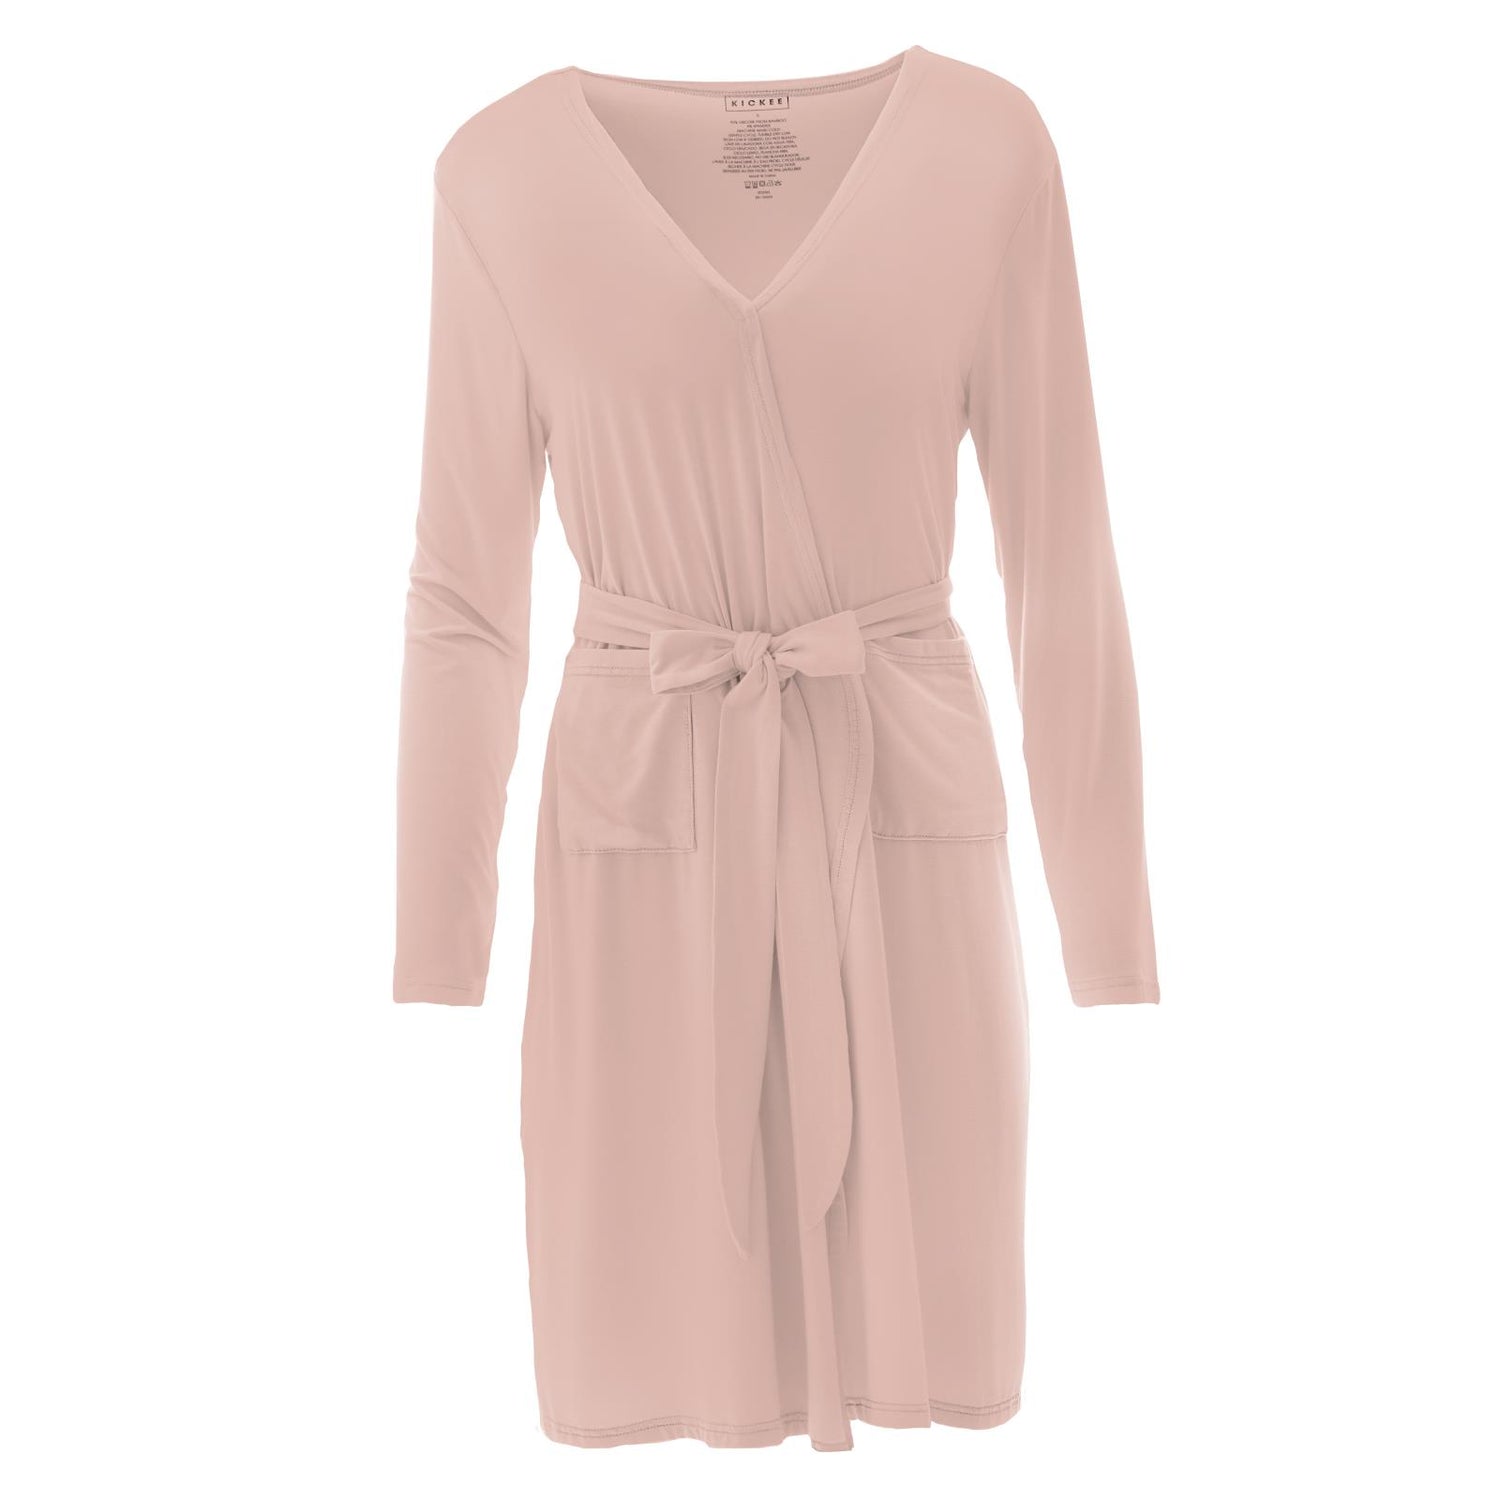 Women's Mid Length Lounge Robe in Peach Blossom